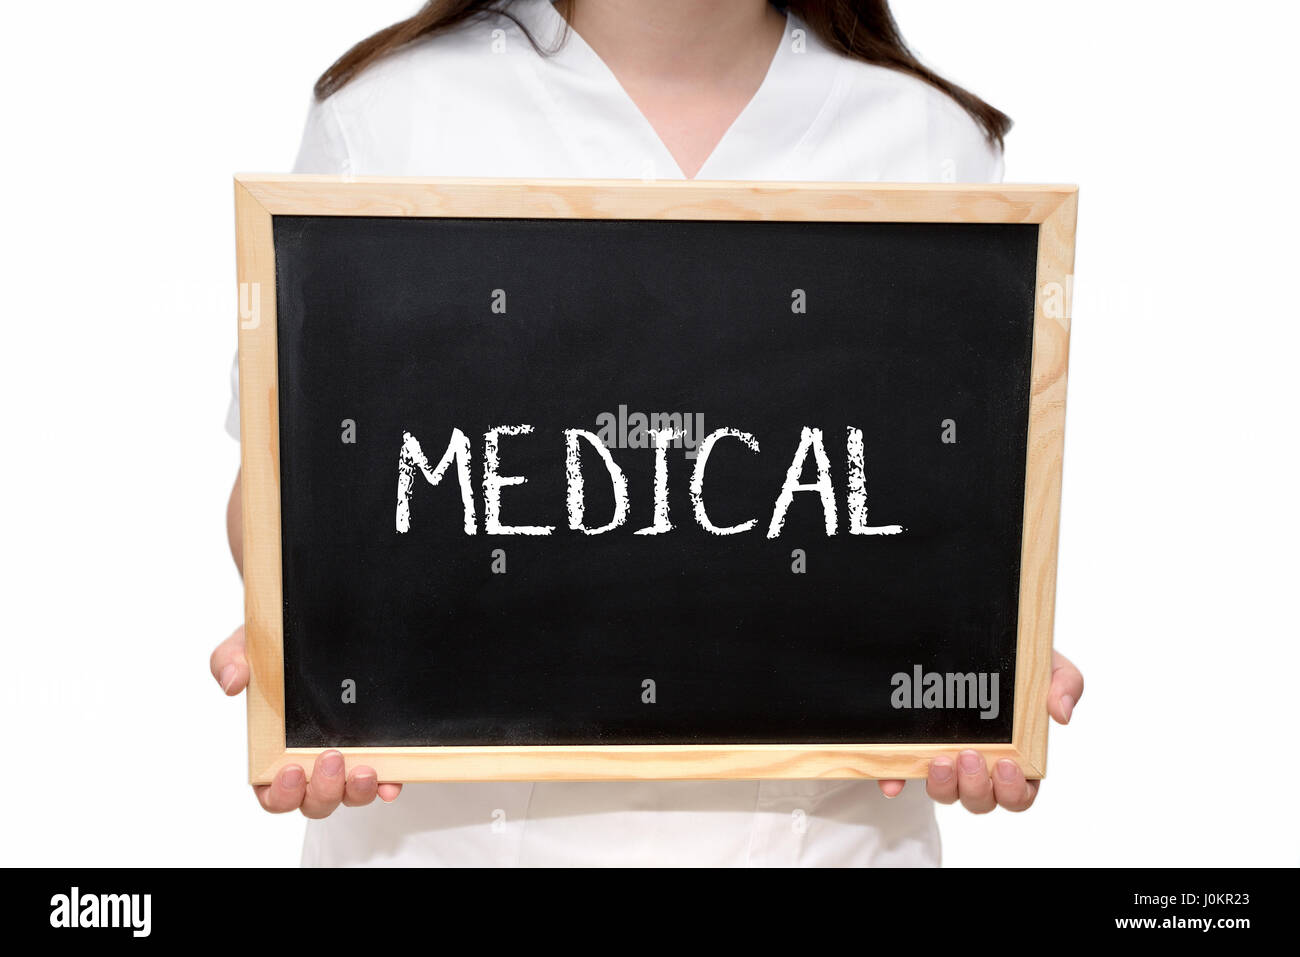 Female nurse holding a slate board with the text Medical written with chalk, isolated on white background. Stock Photo